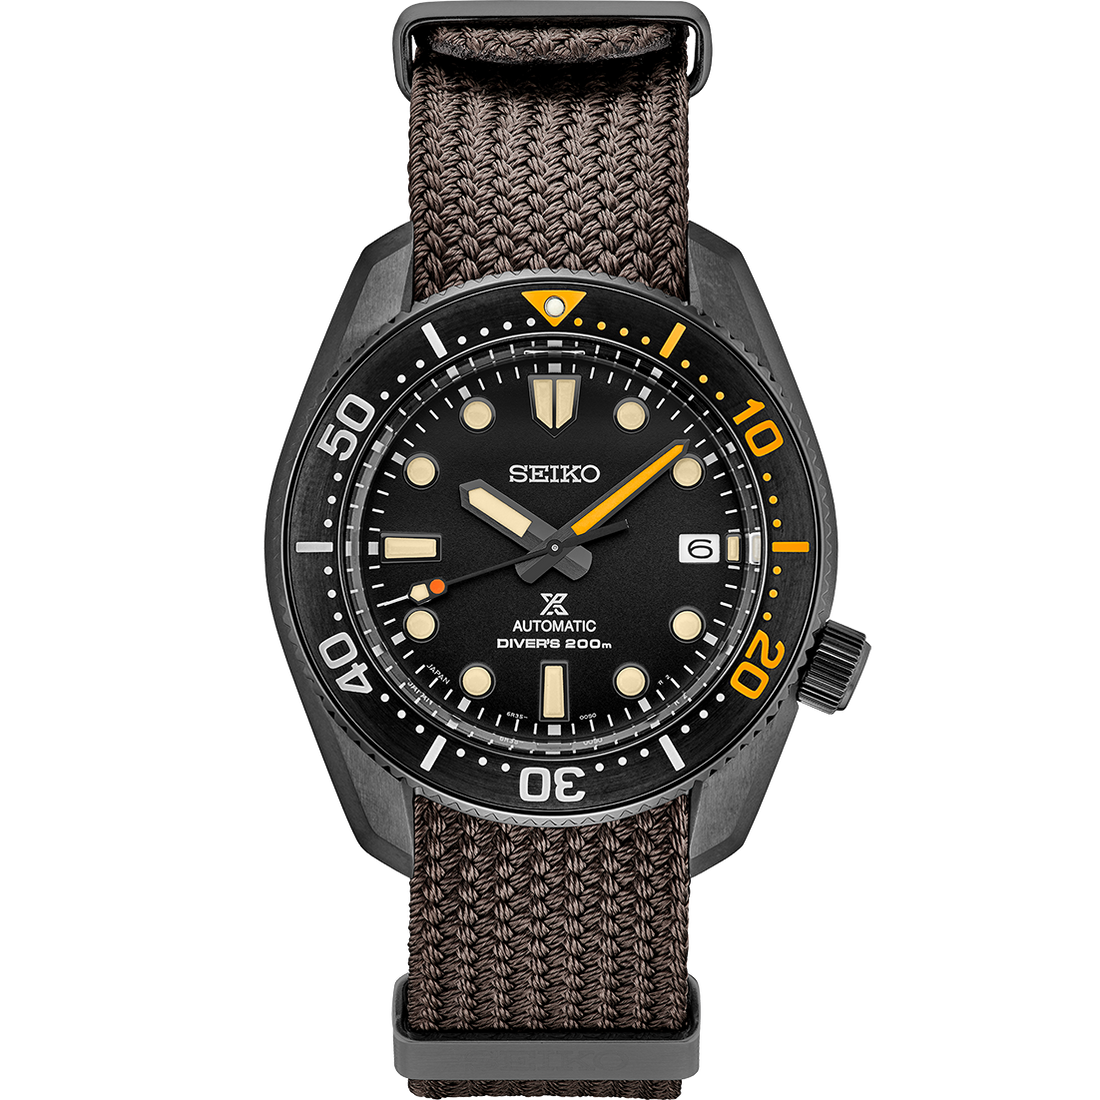 Seiko SPB255 Black Limited Edition Diver Automatic Watch | Skeie's Jewelers